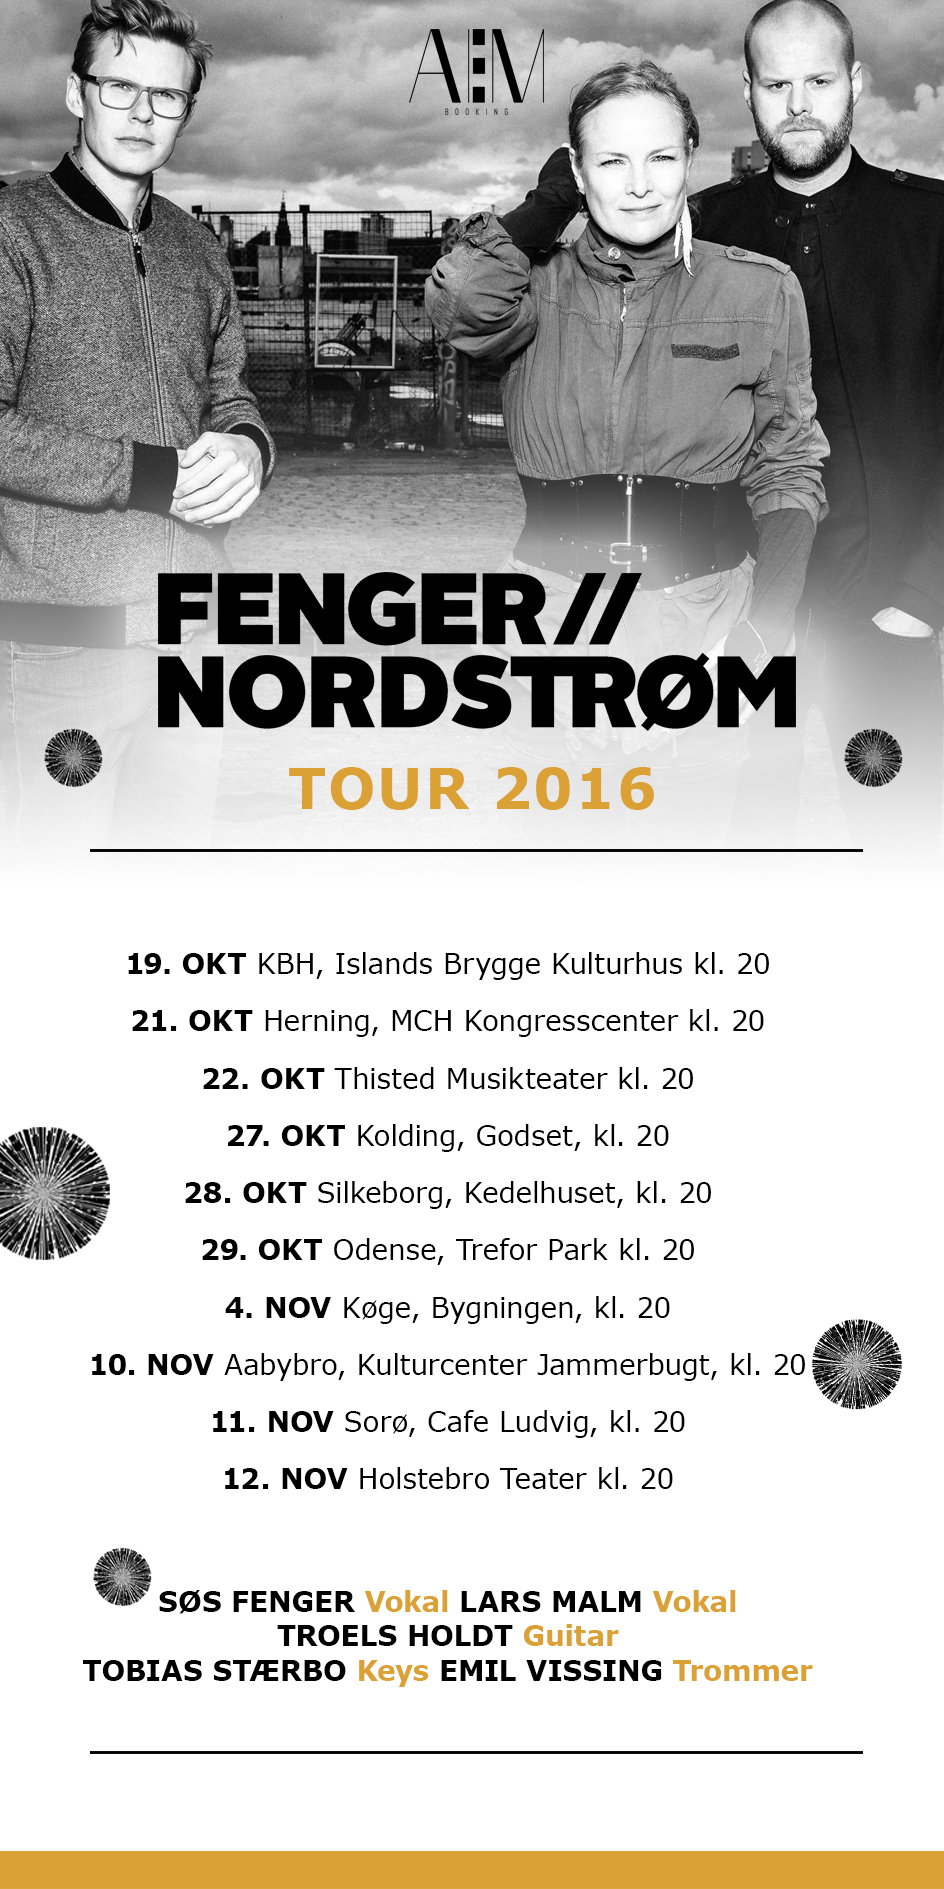 http://aembooking.dk/wp-content/uploads/2016/09/FN_TOUR1-2.jpg